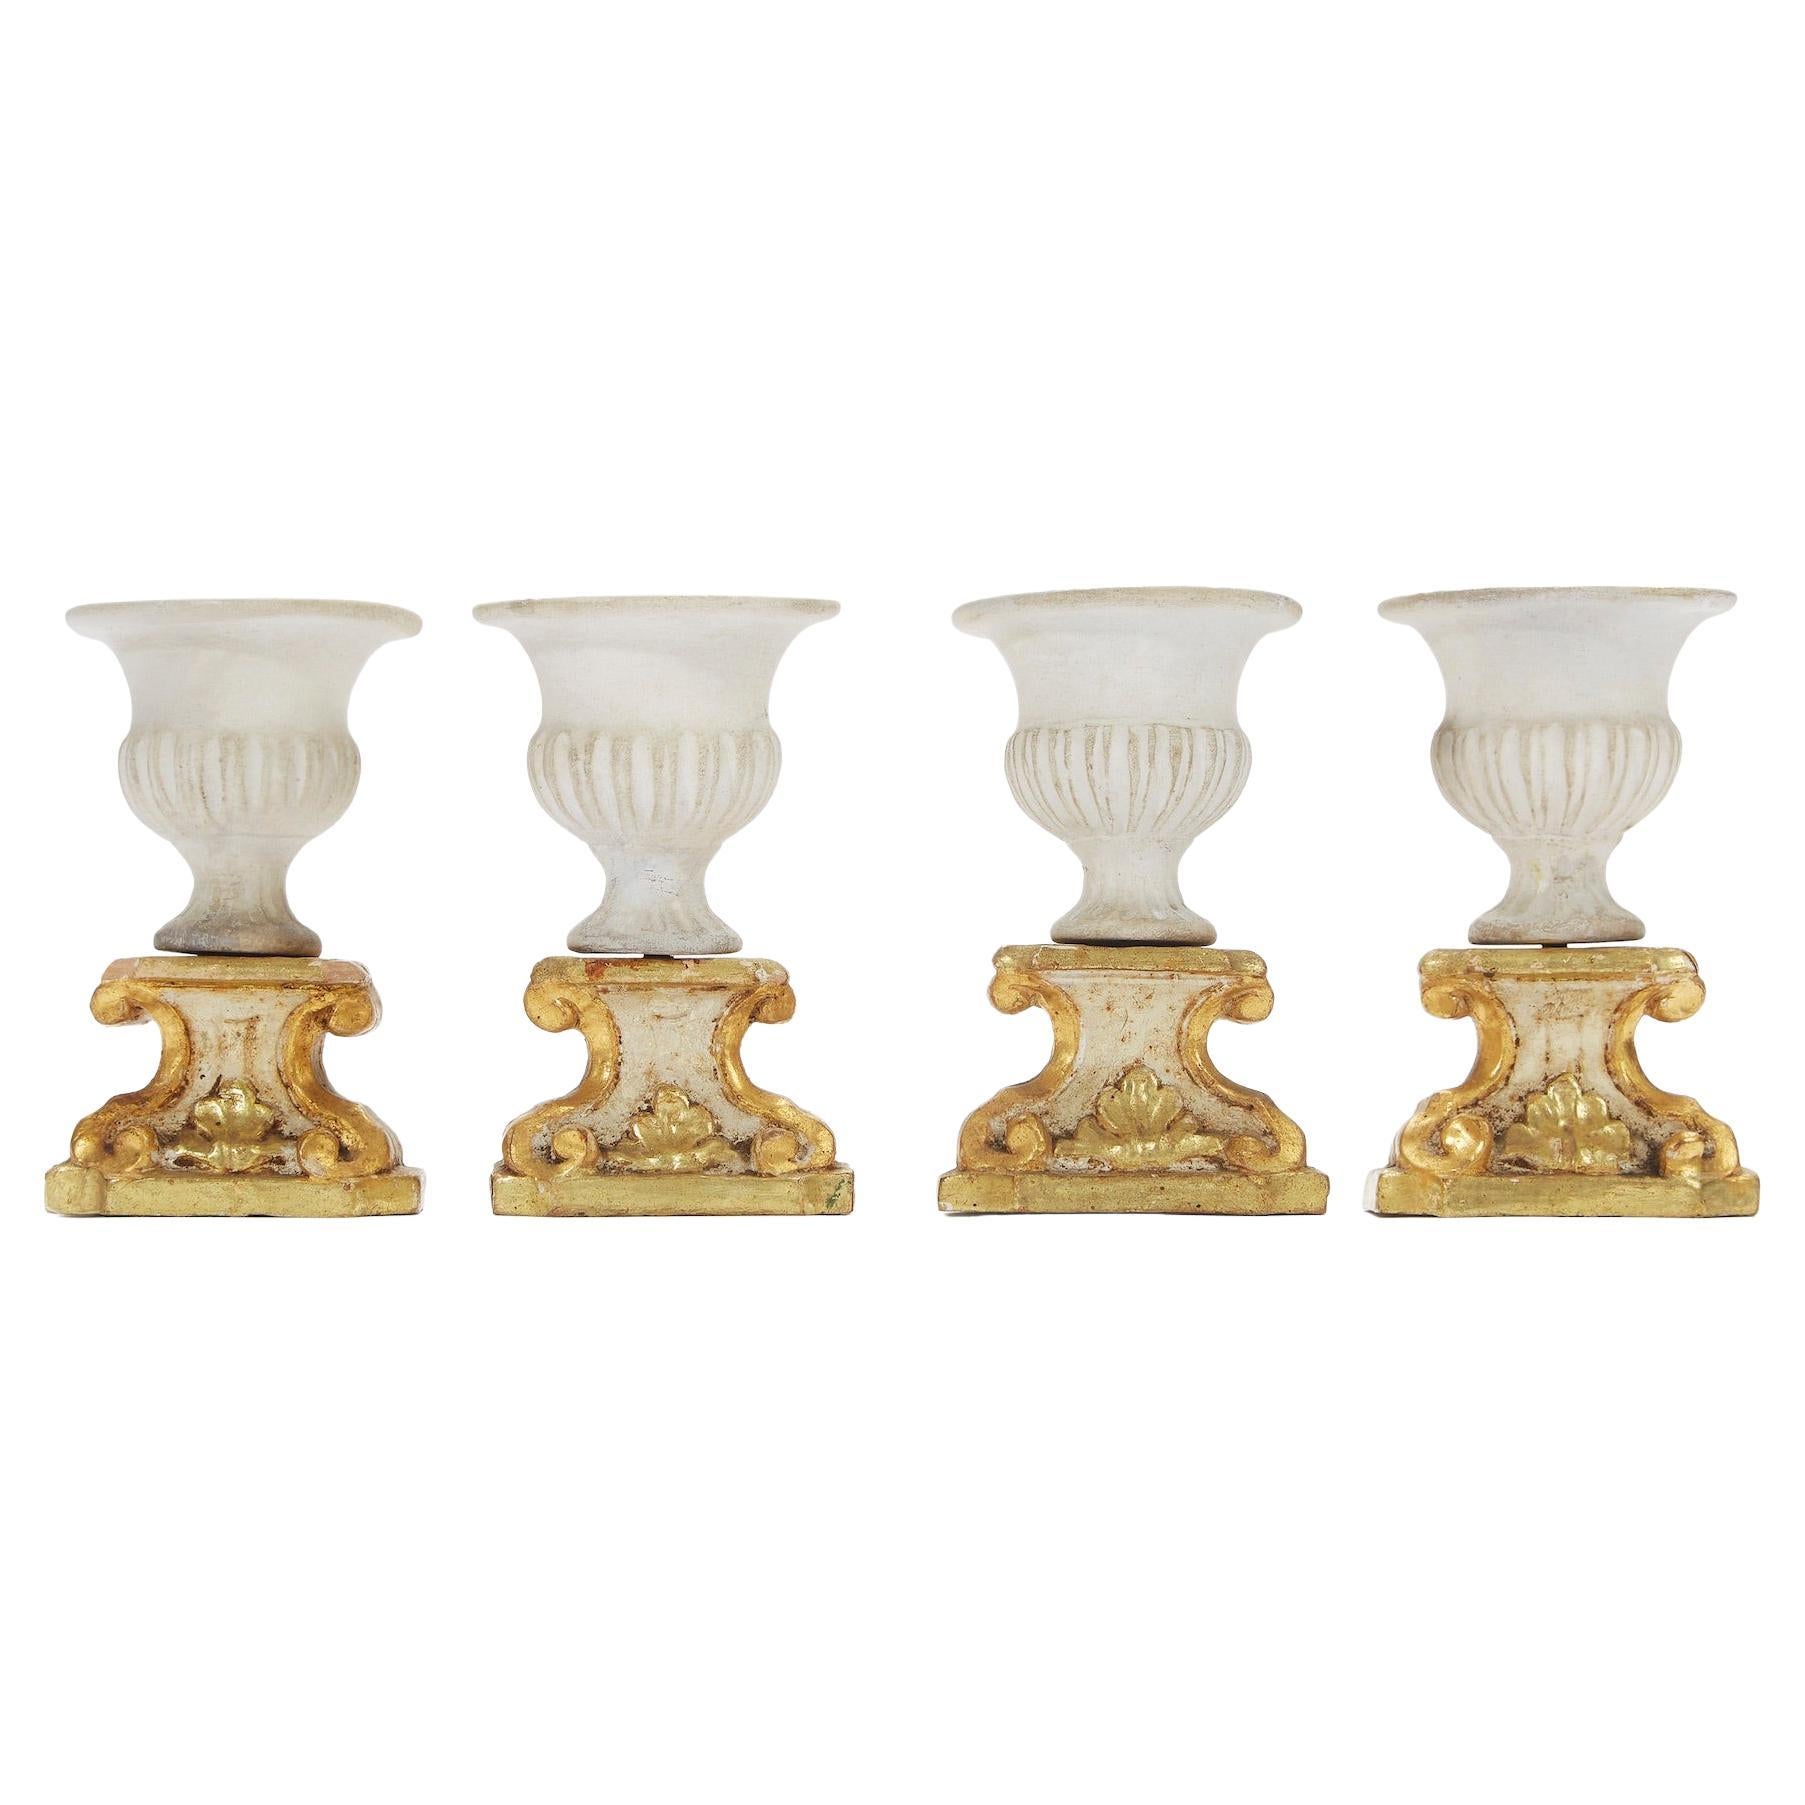 Four Neoclassical Italian Biscuit Vases on Giltwood Bases Table Decorations For Sale